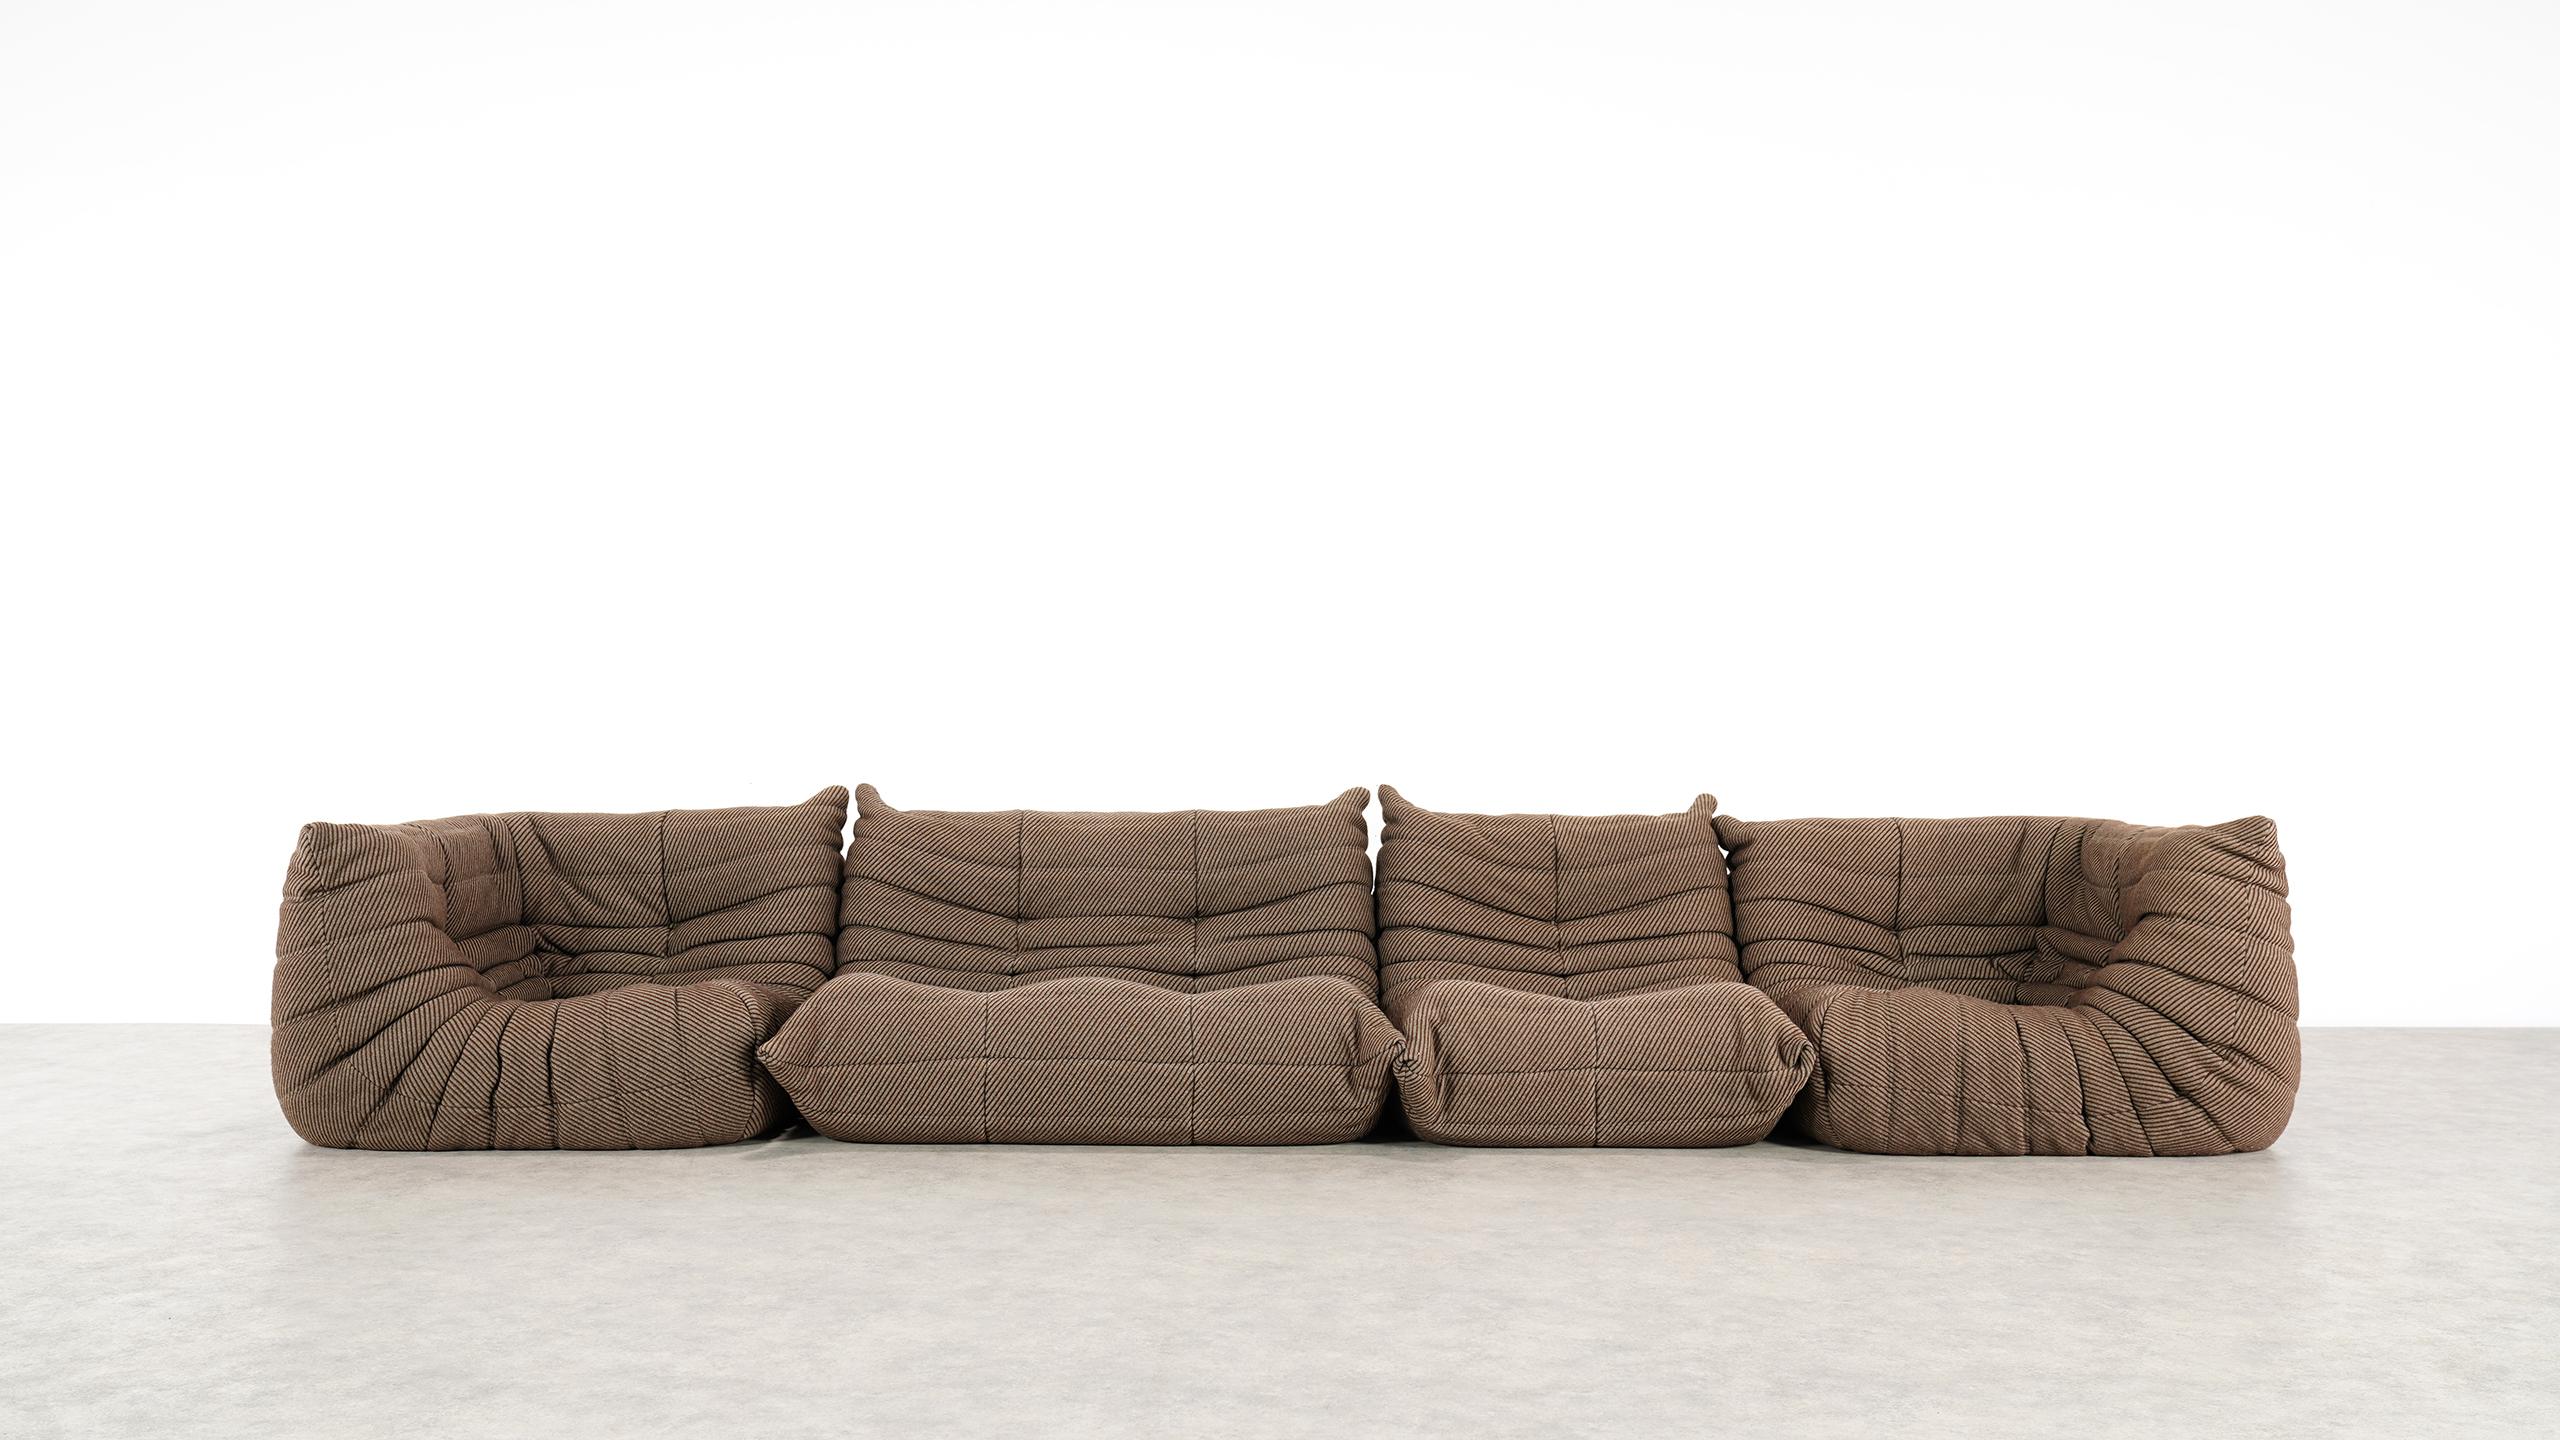 Wonderful living room set
Sofa system TOGO, designed by Michel Ducaroy in 1974. Manufactured by Ligne Roset, France
This sofa consists of 2 corner elements, a 2-seat element, a 1-seat element and a footrest /pouf.
It features it´s original